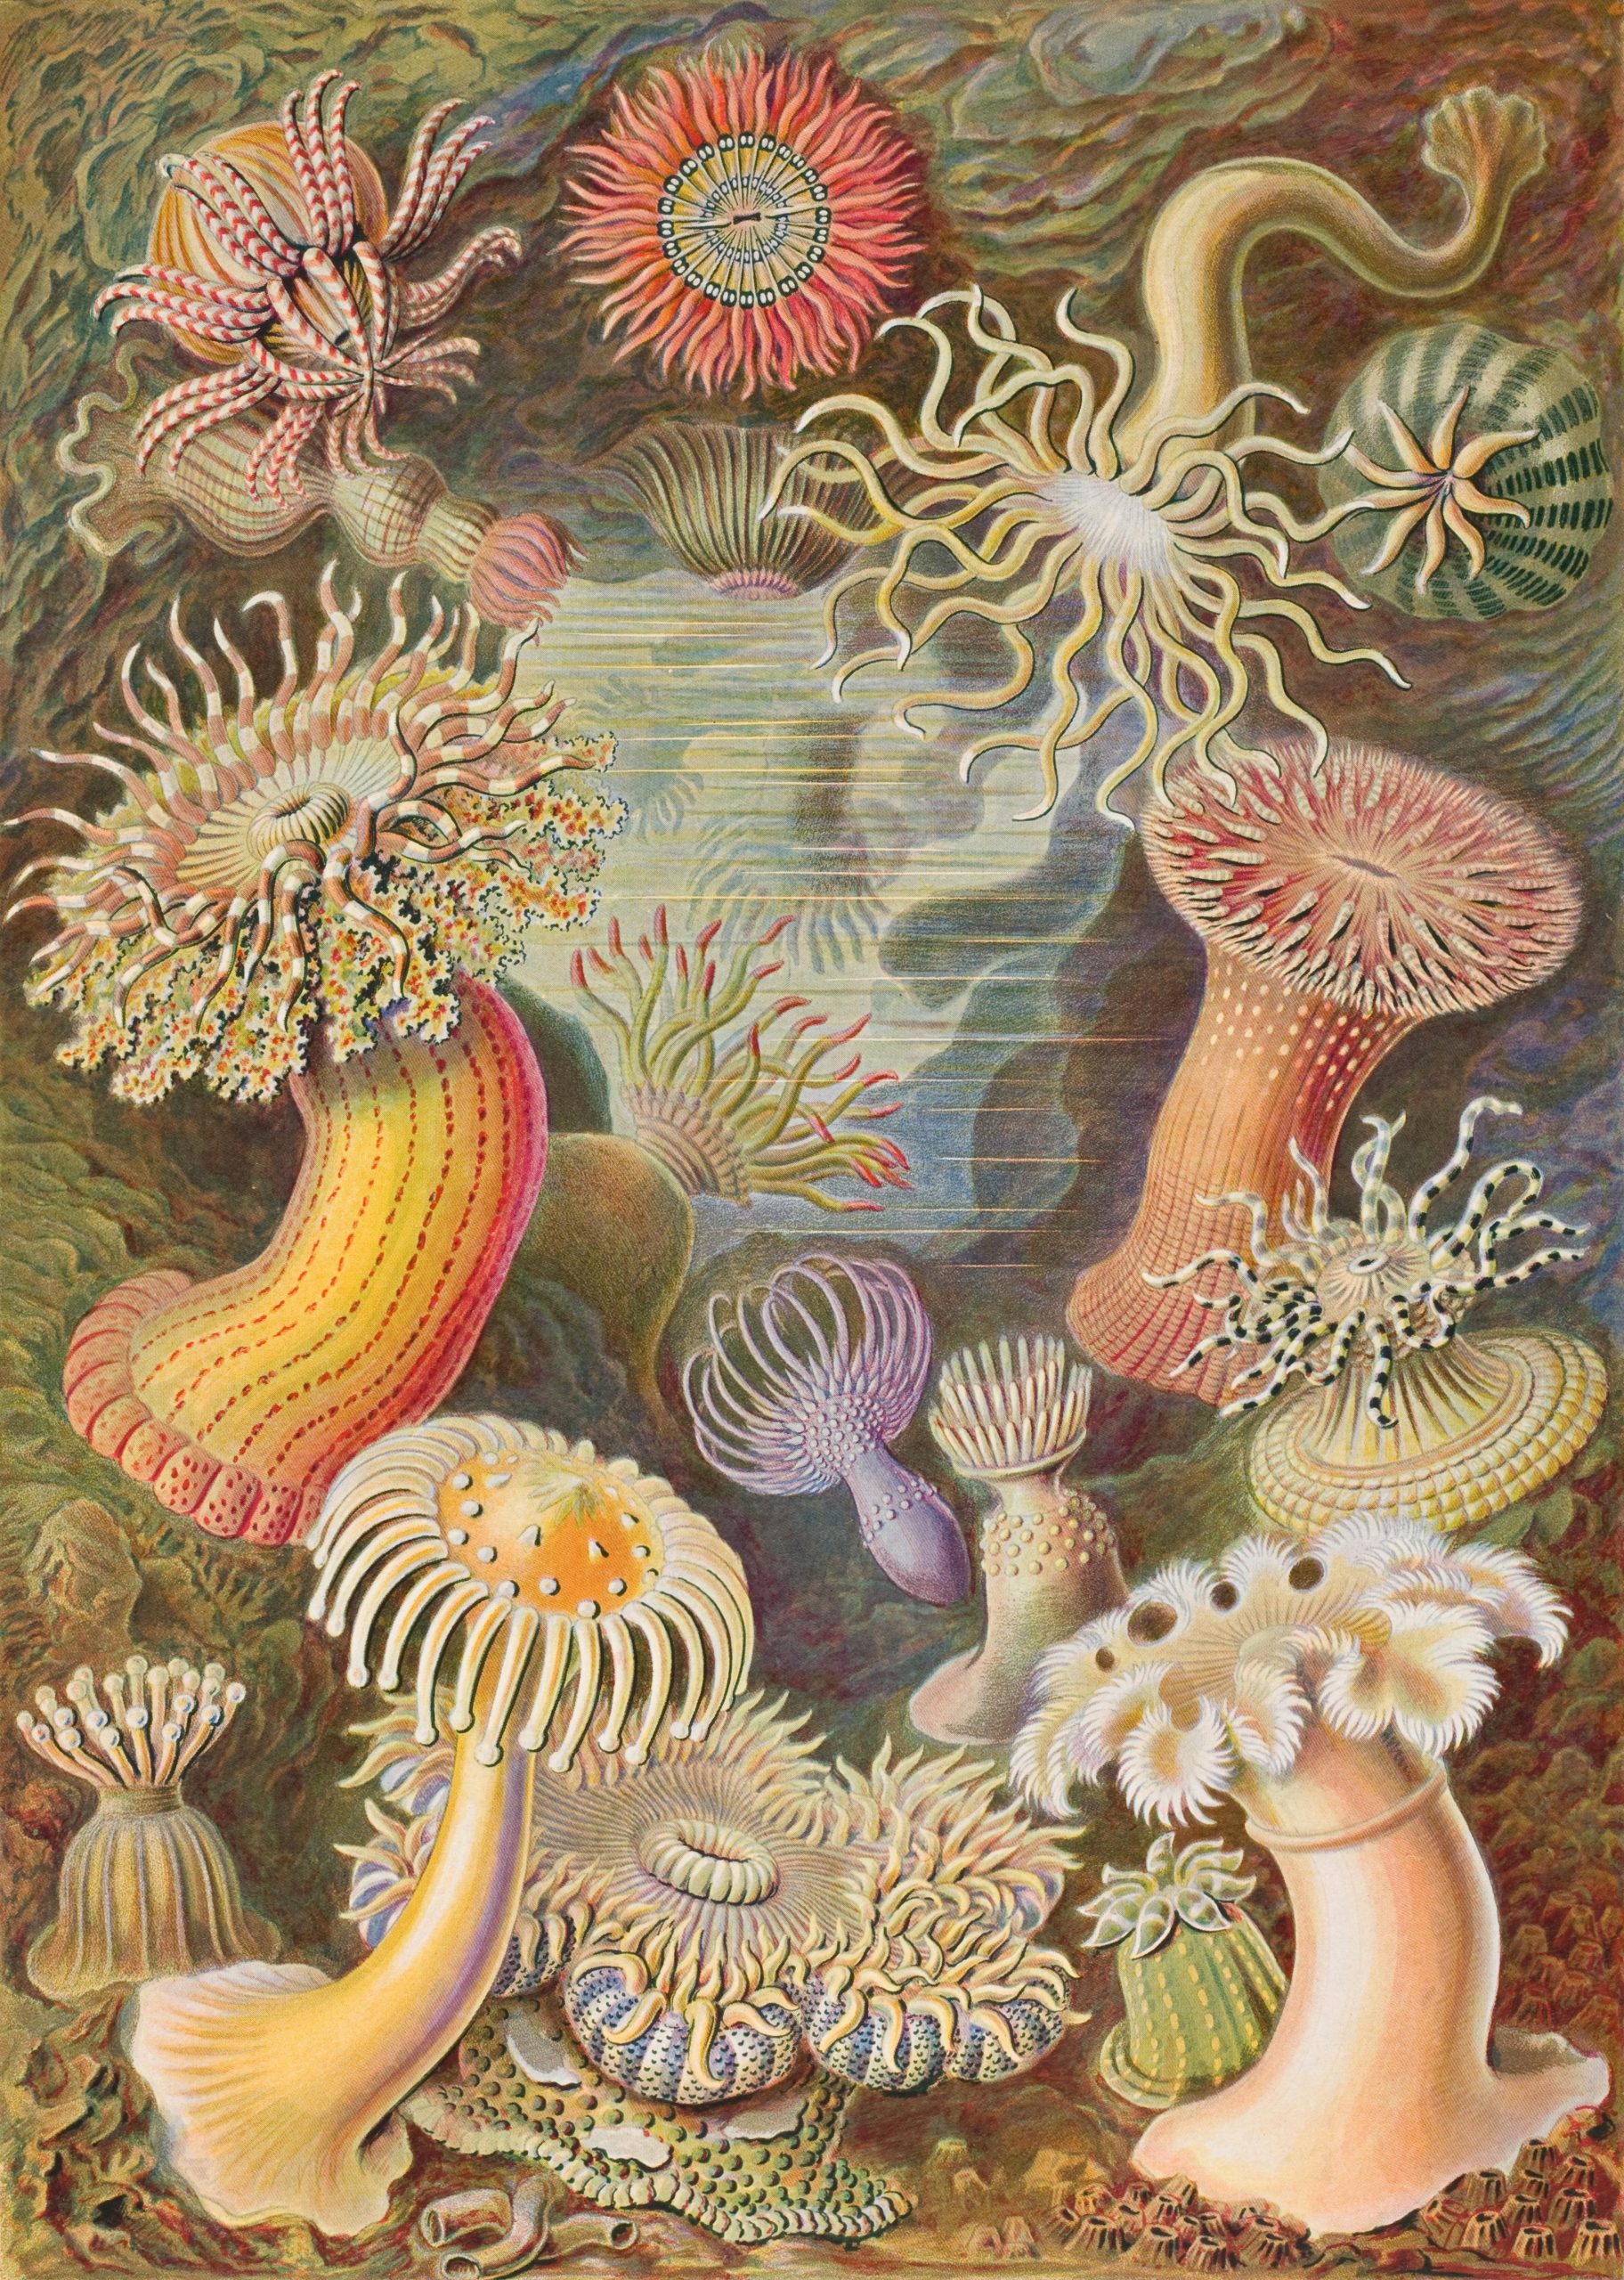 A detailed illustration of various sea anemone